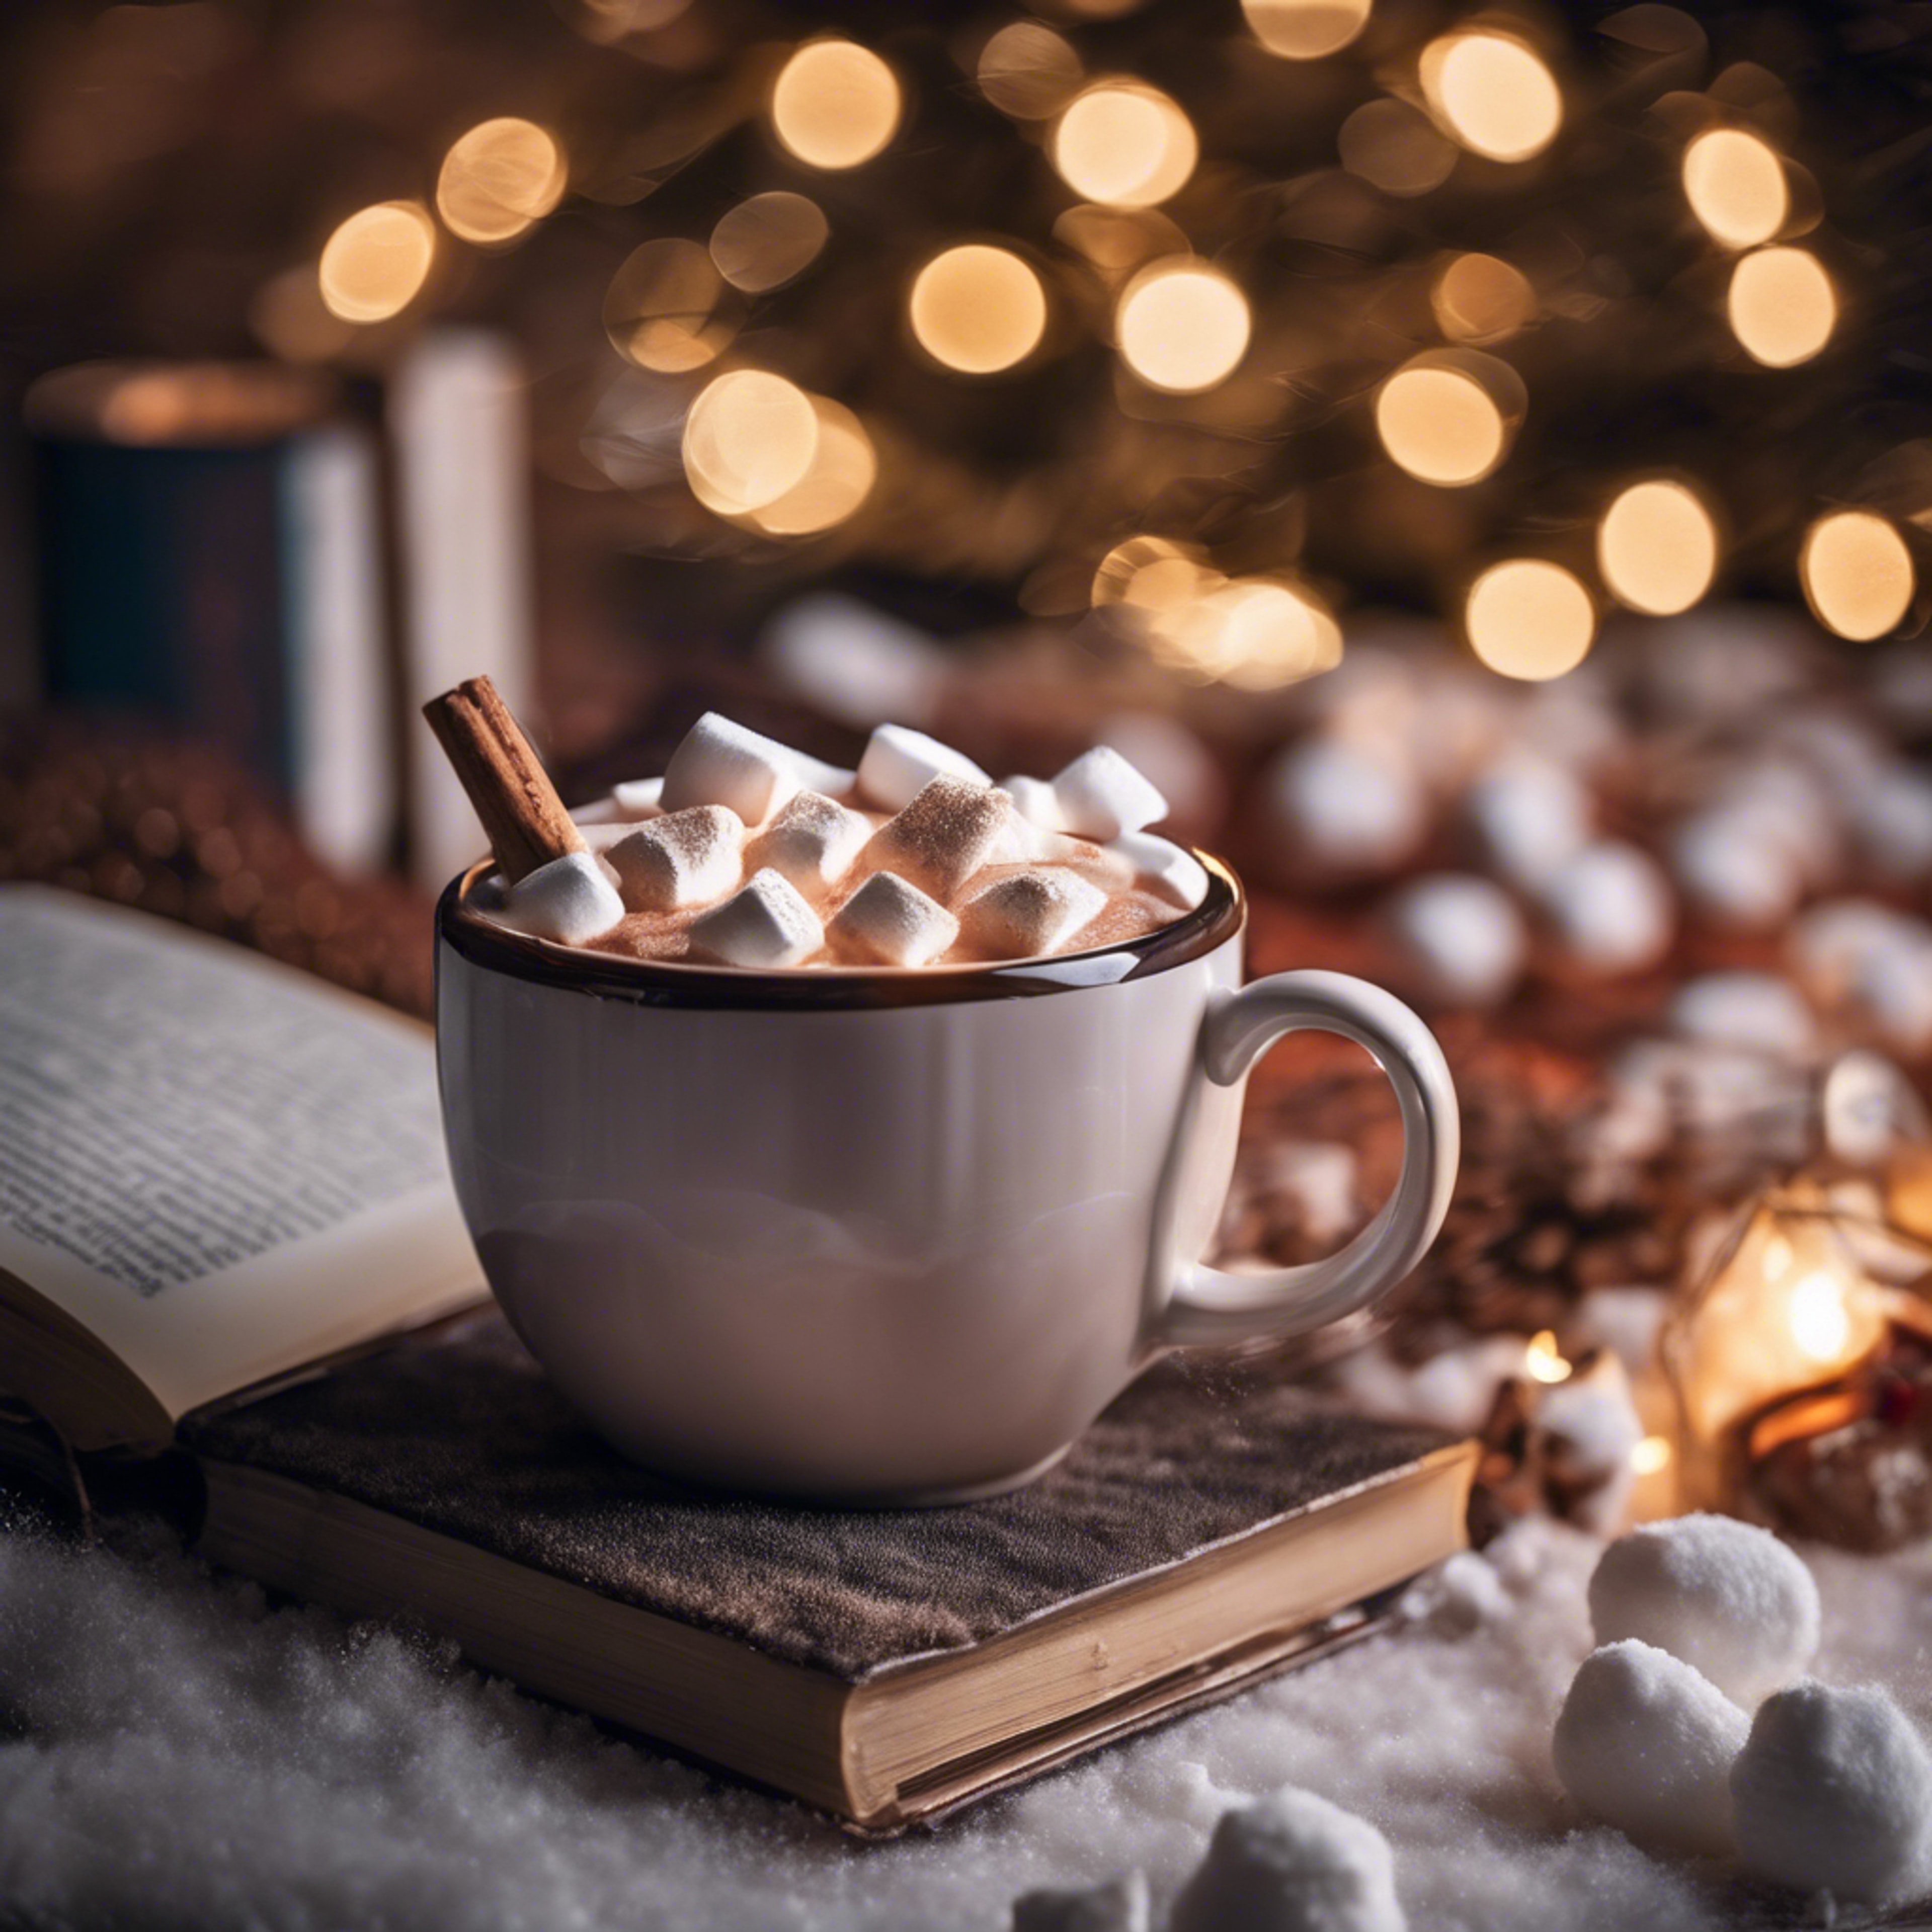 A steaming mug of hot cocoa topped with marshmallows, paired with a good book on a winter night. Fondo de pantalla[bb1918feb58c4b029e23]